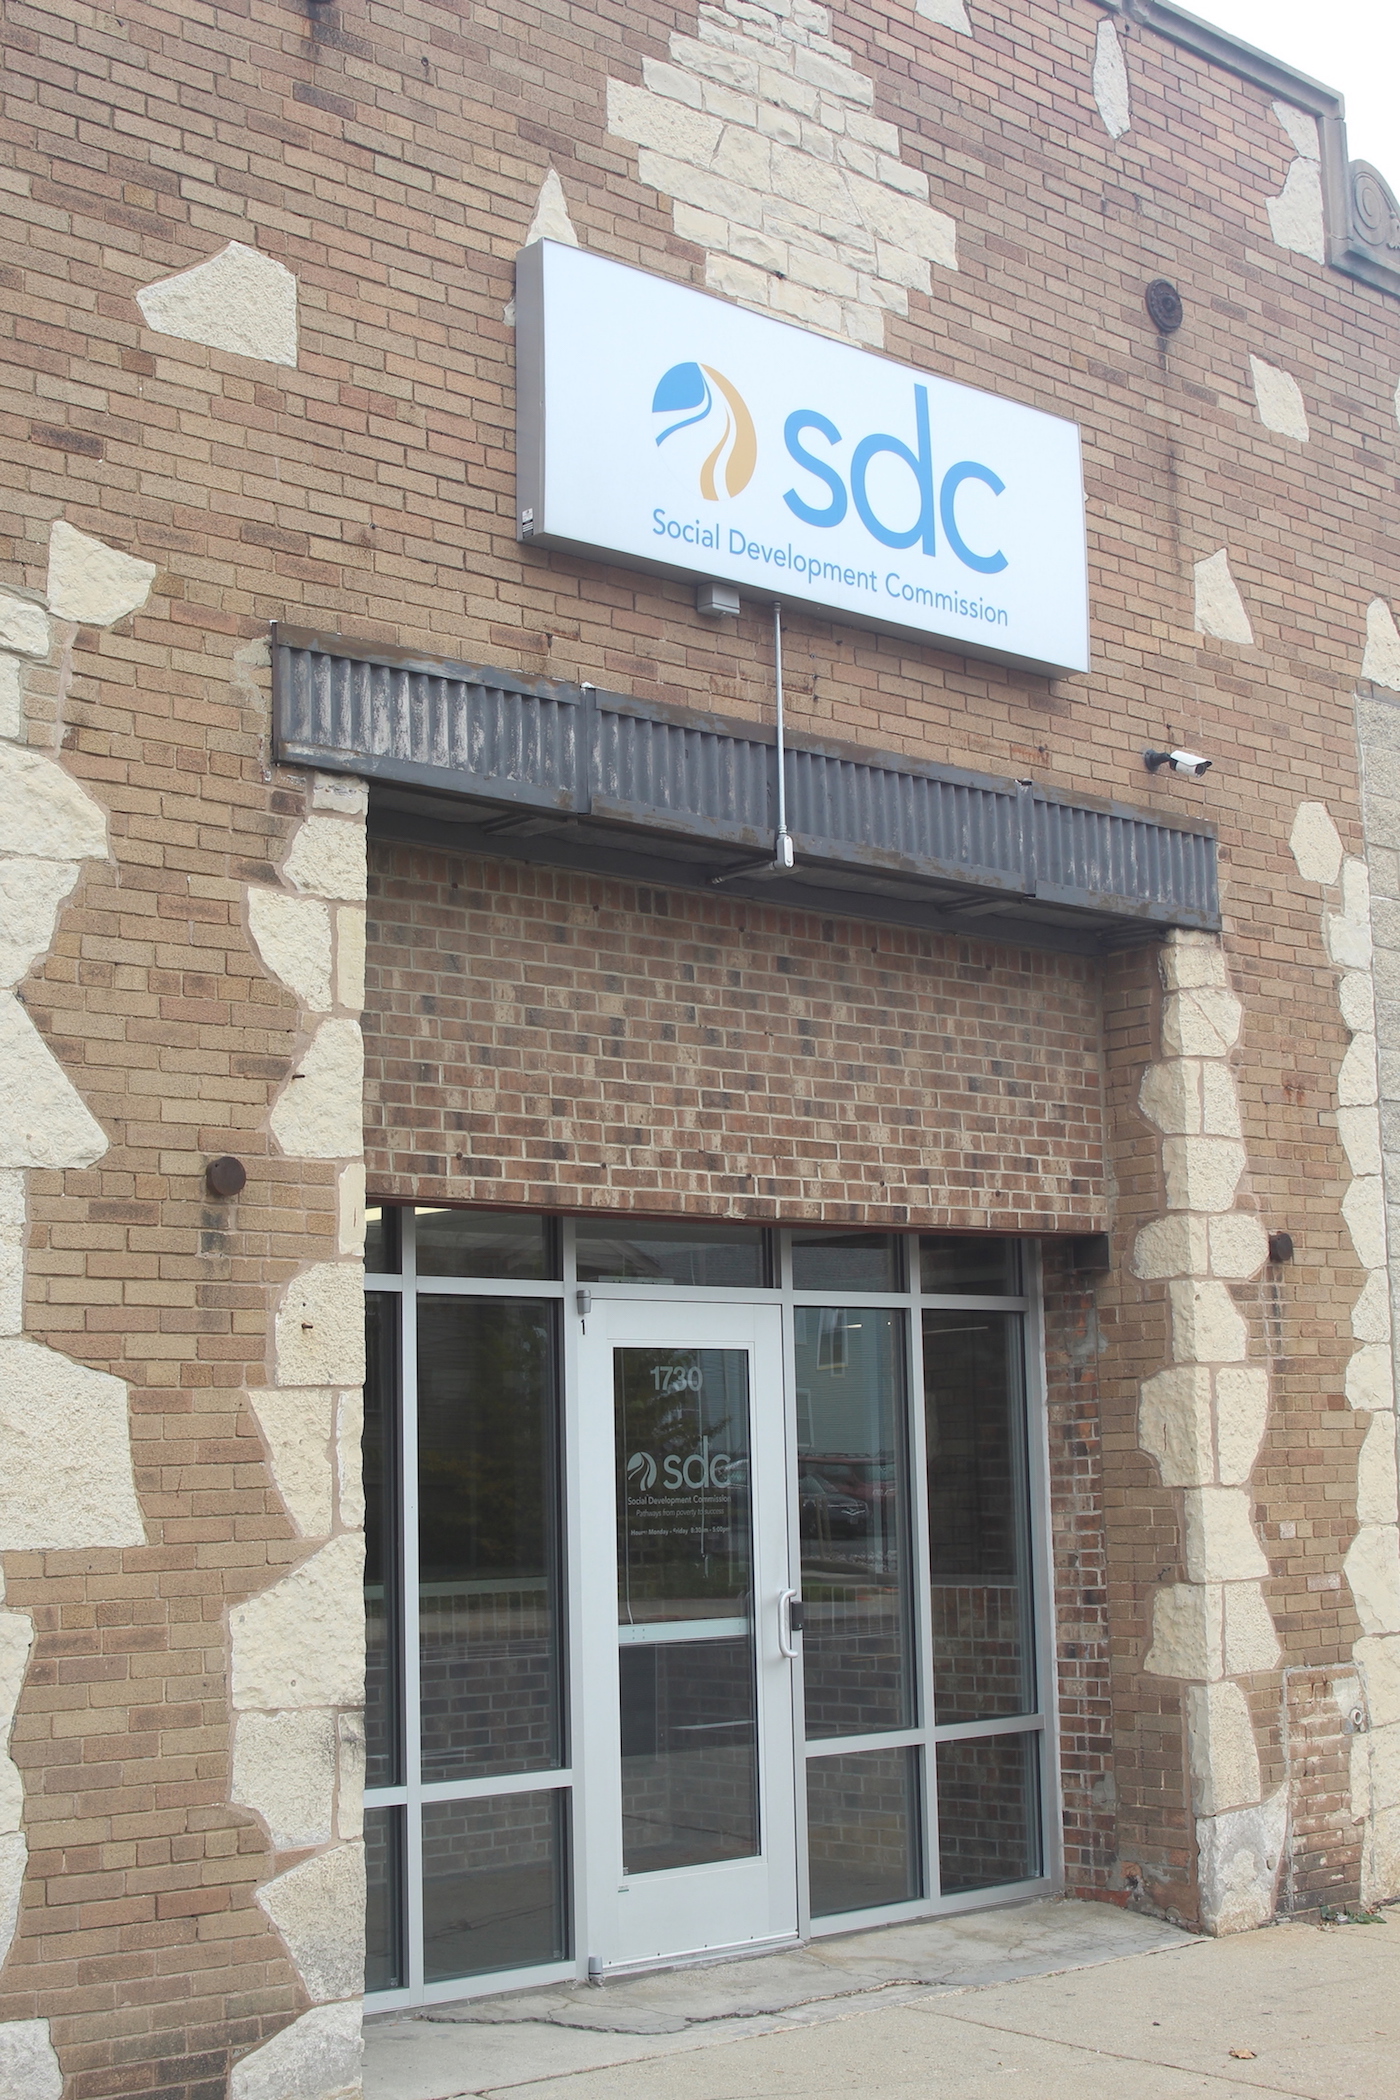 Since 1963, the SDC has served as a community action agency in Milwaukee and provided resources for individuals to move beyond poverty.